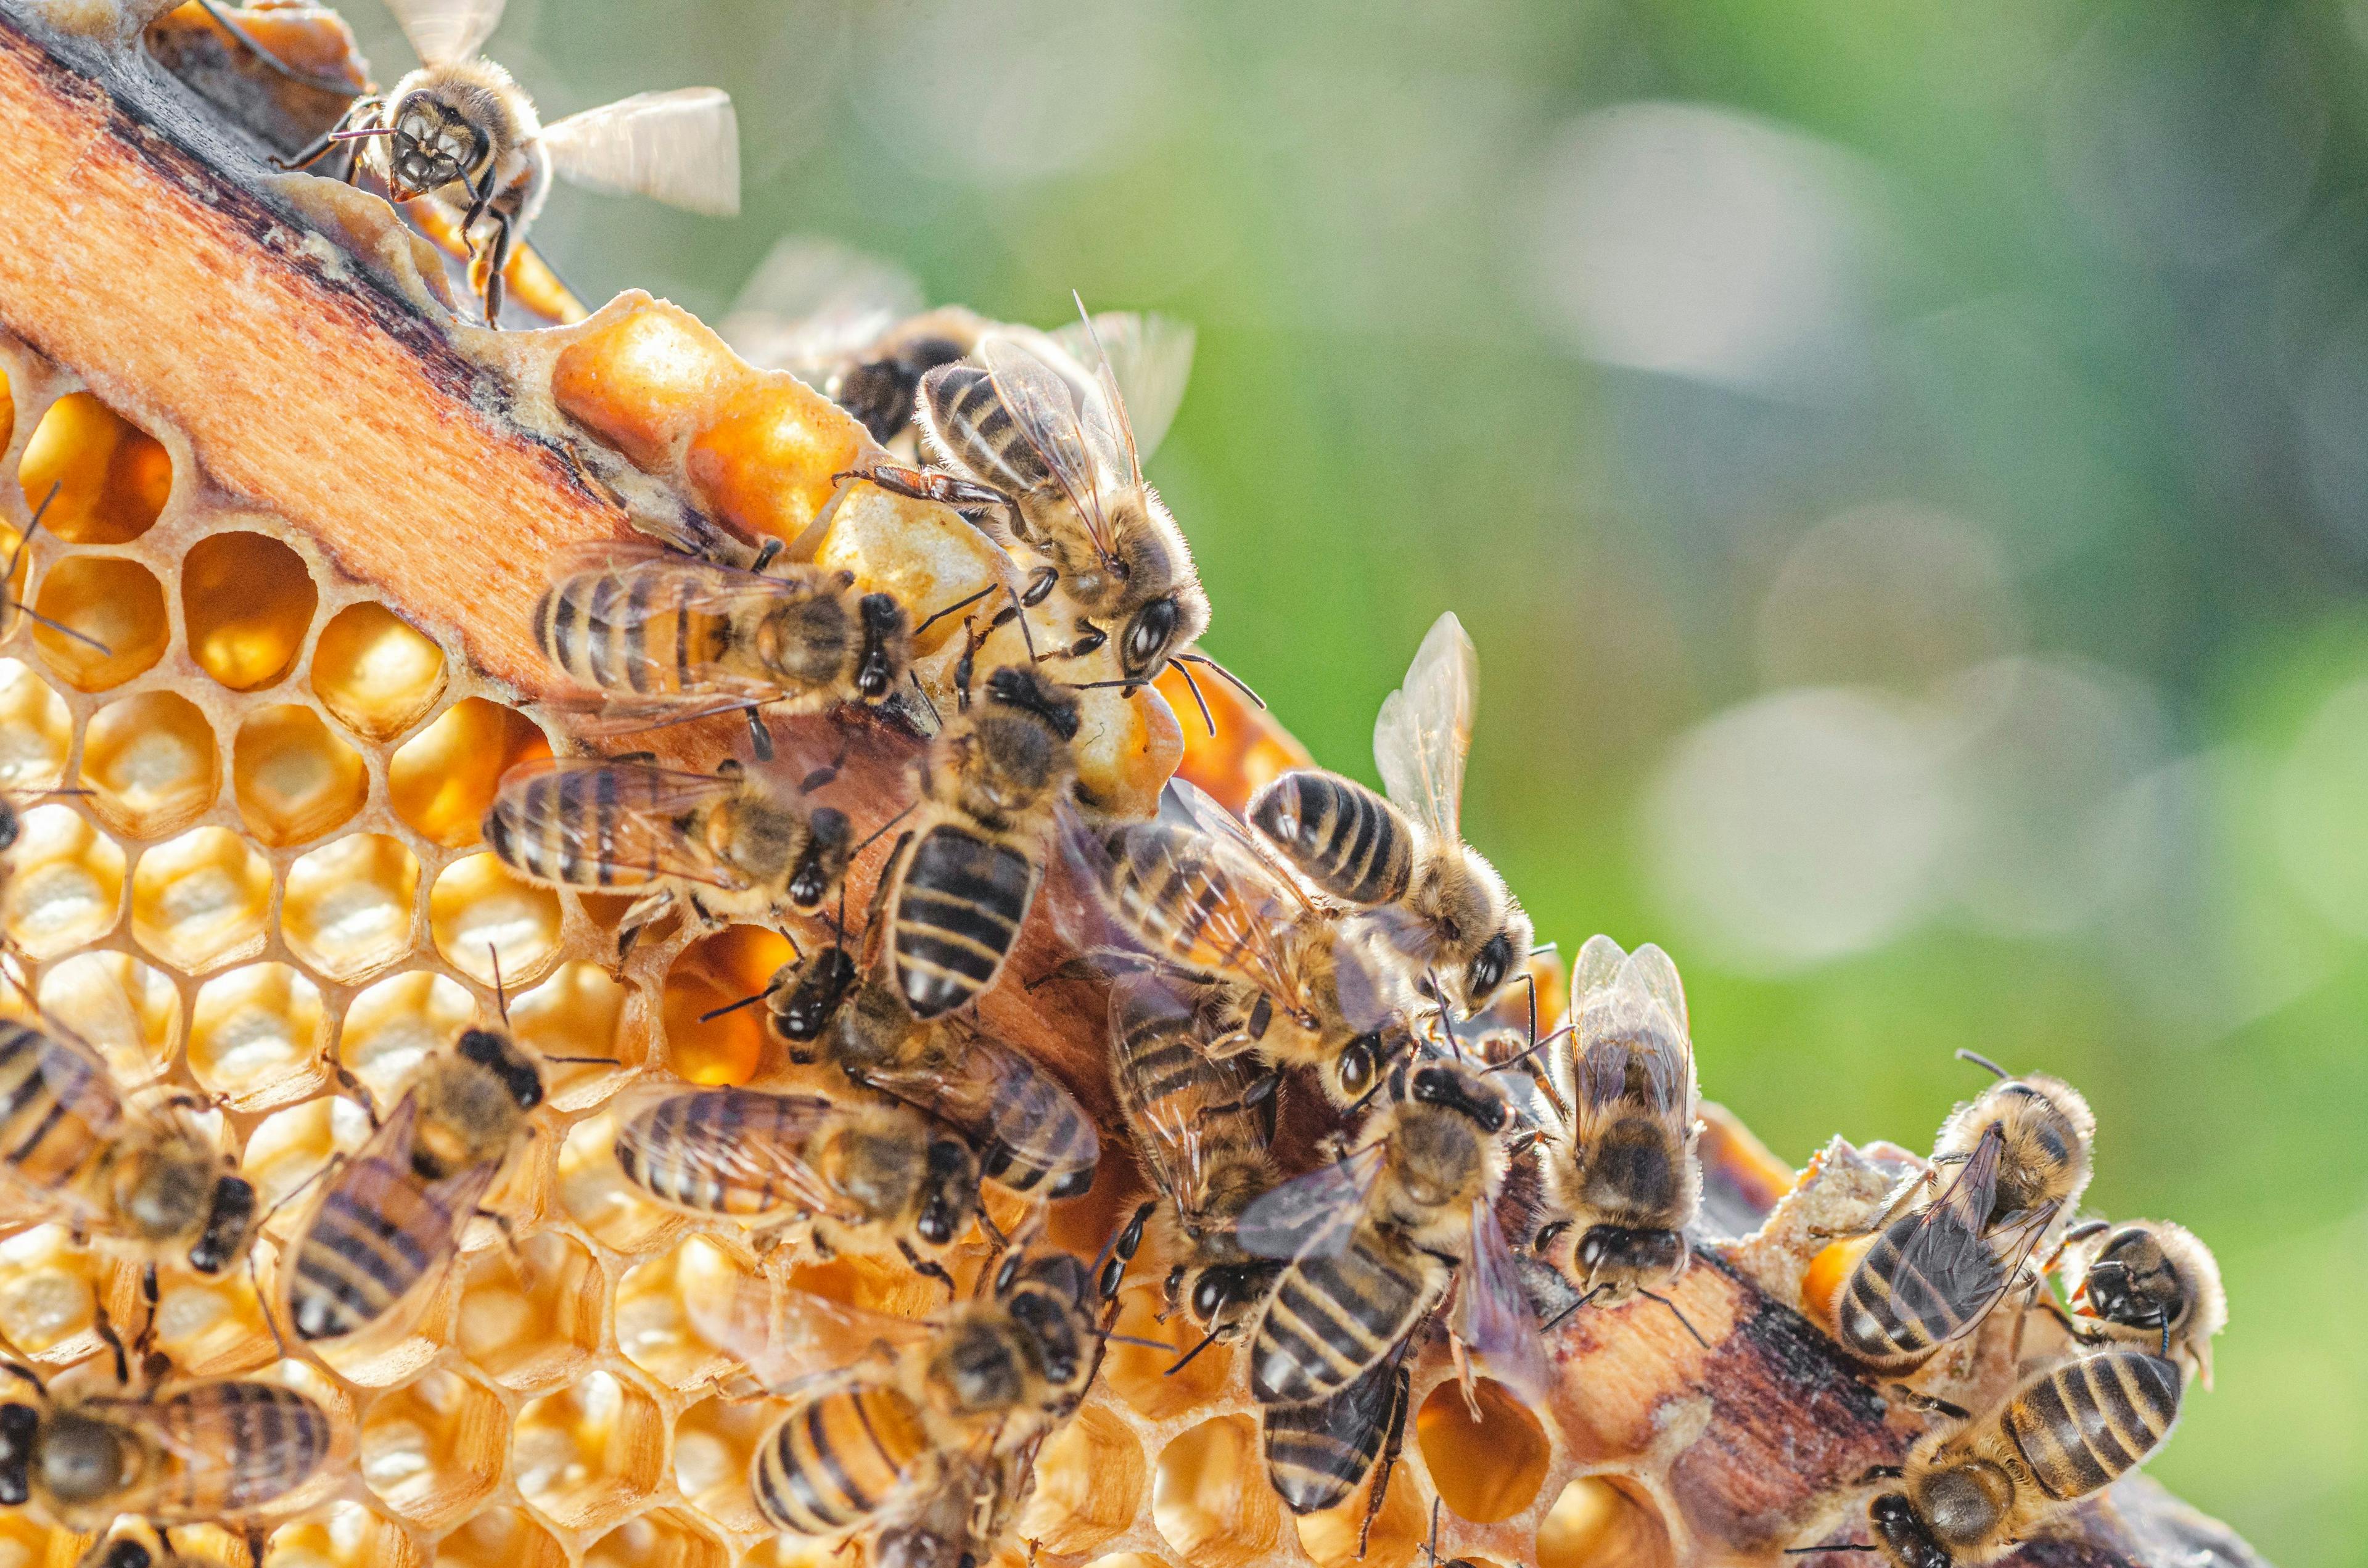 Bees on apiary honeycomb